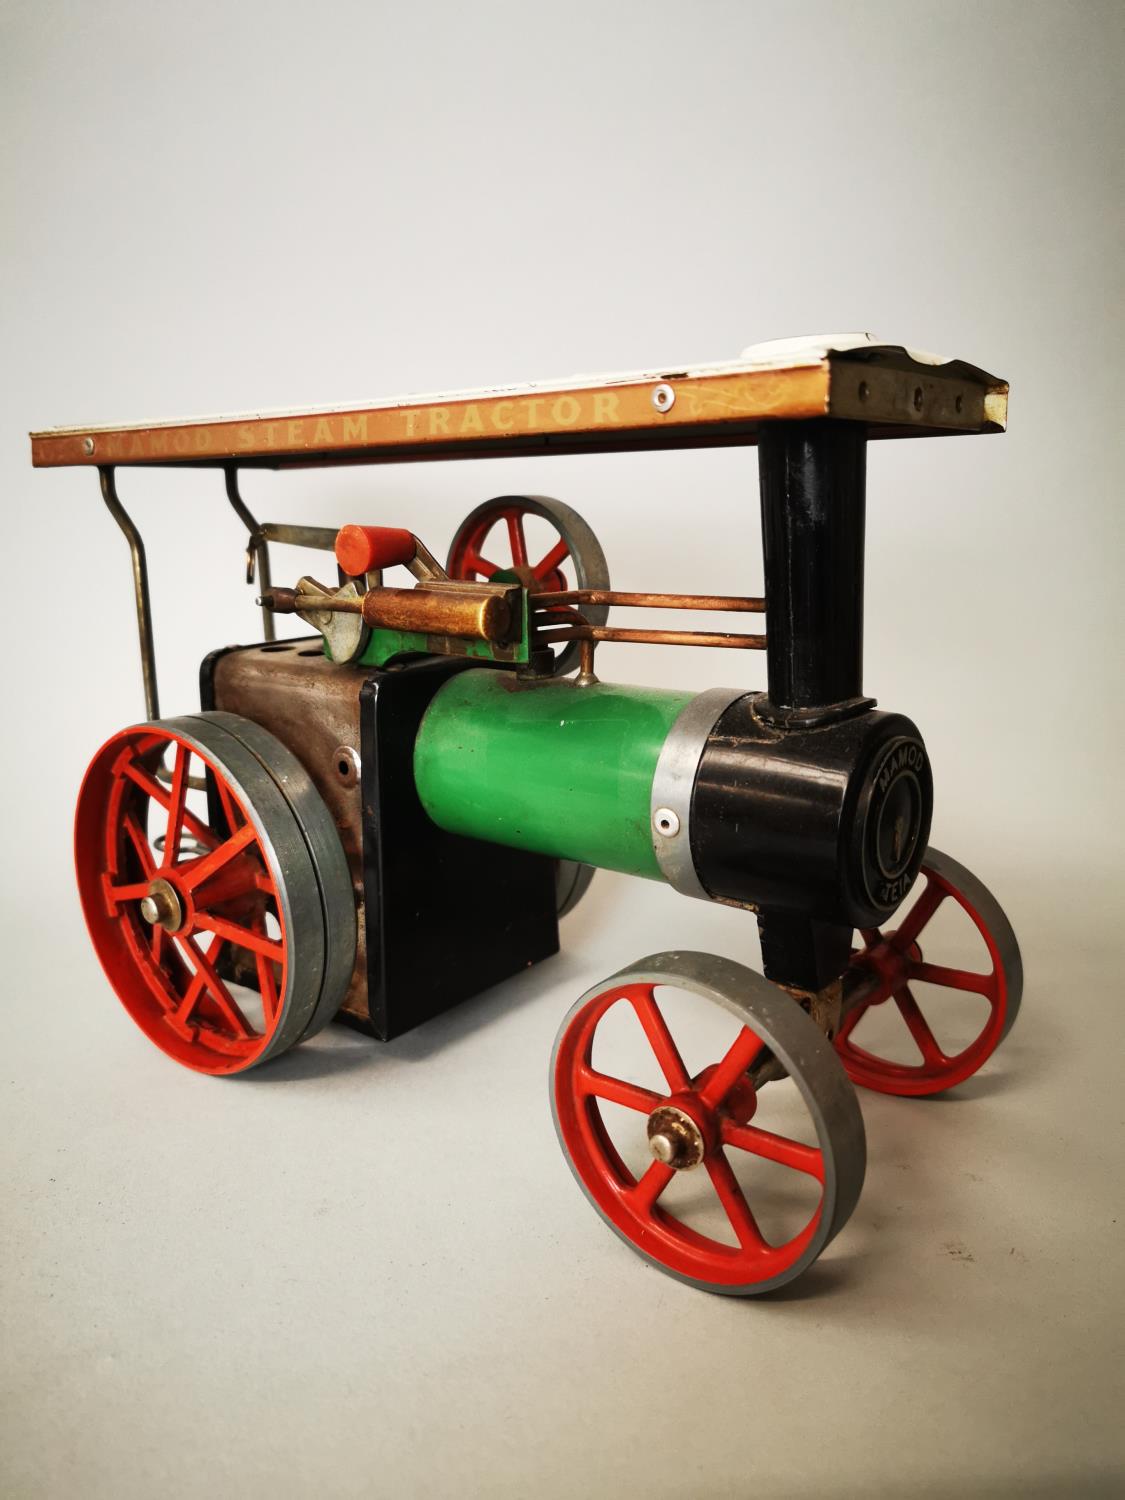 Model of a working Steam Engine.